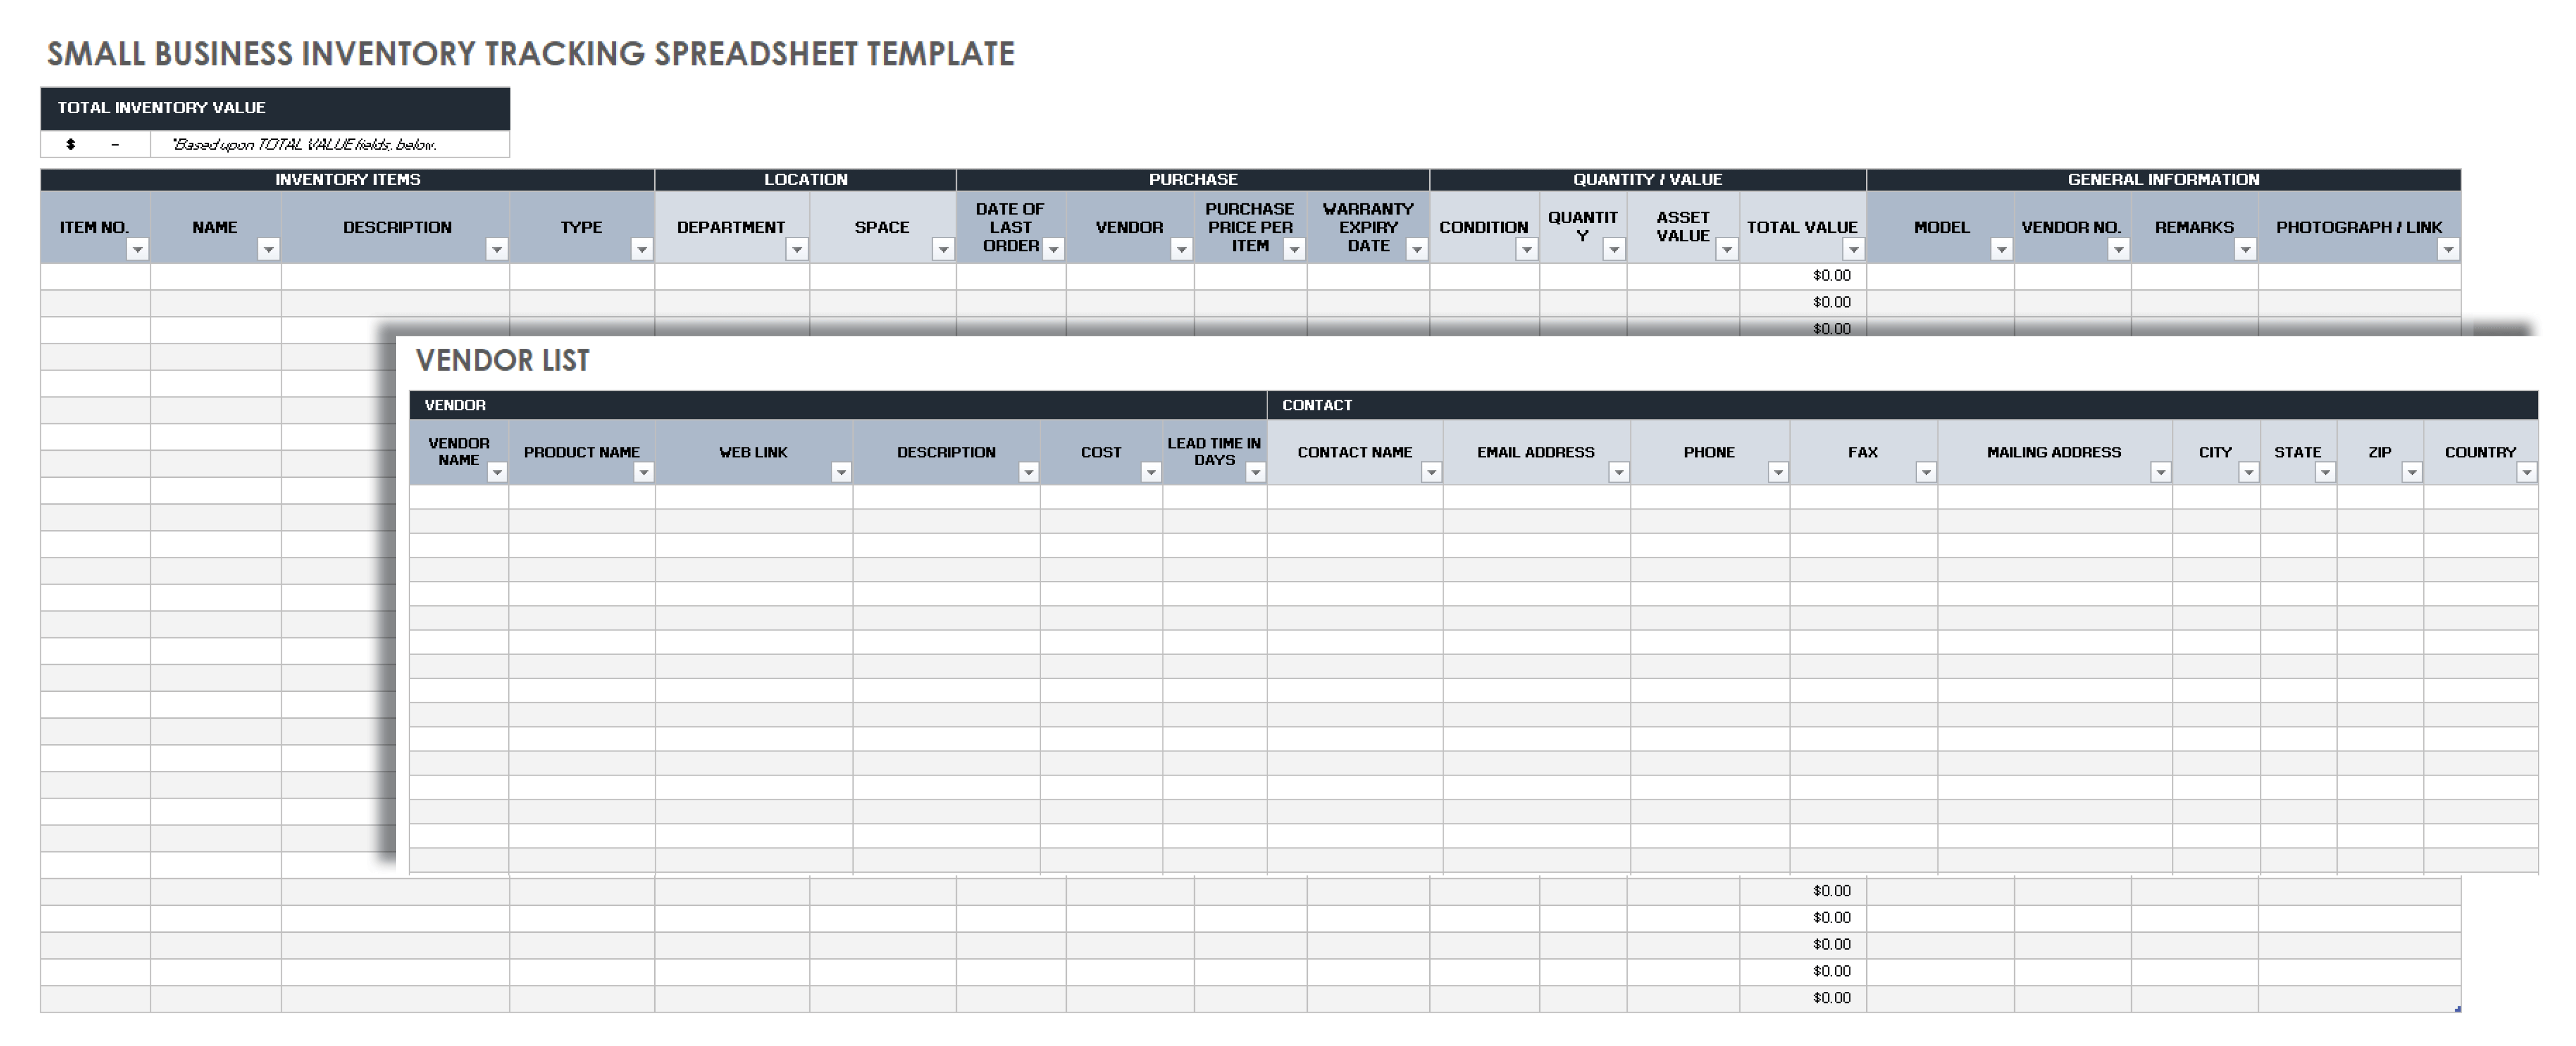 Small Business Inventory Tracking Spreadsheet Template